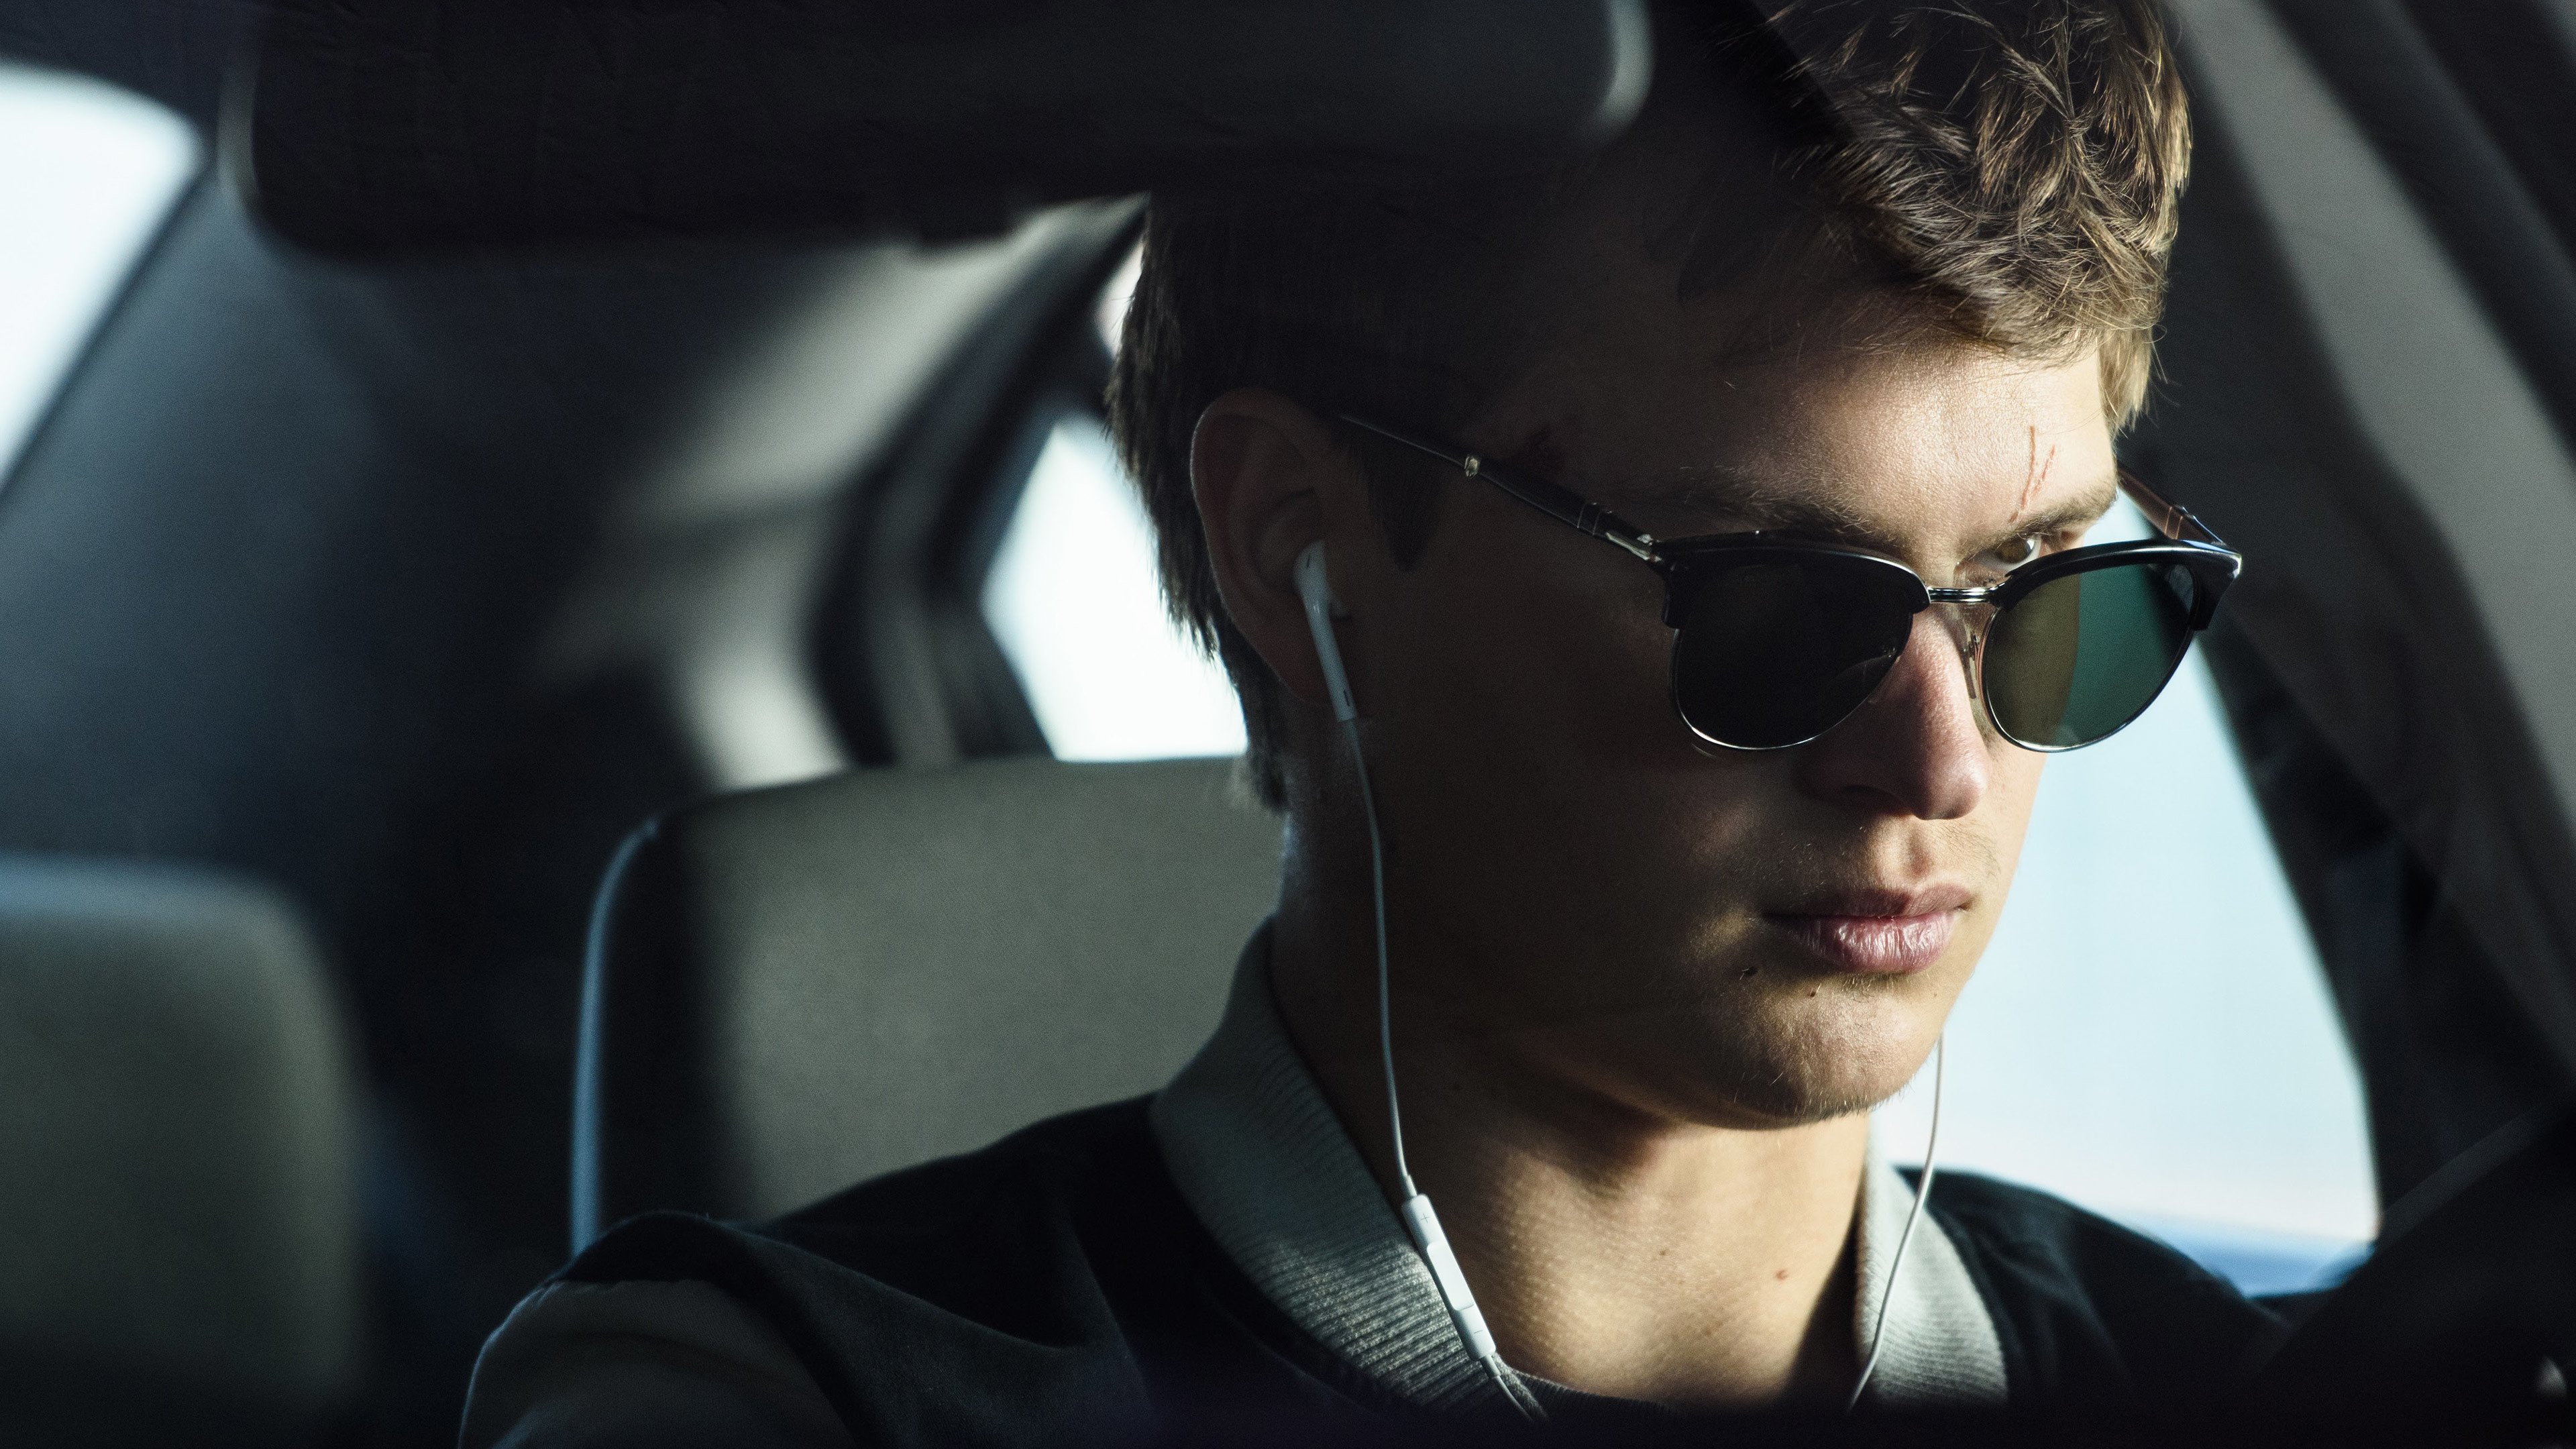 Ansel Elgort Baby Baby Driver Car Earbuds Sunglasses 3840x2160